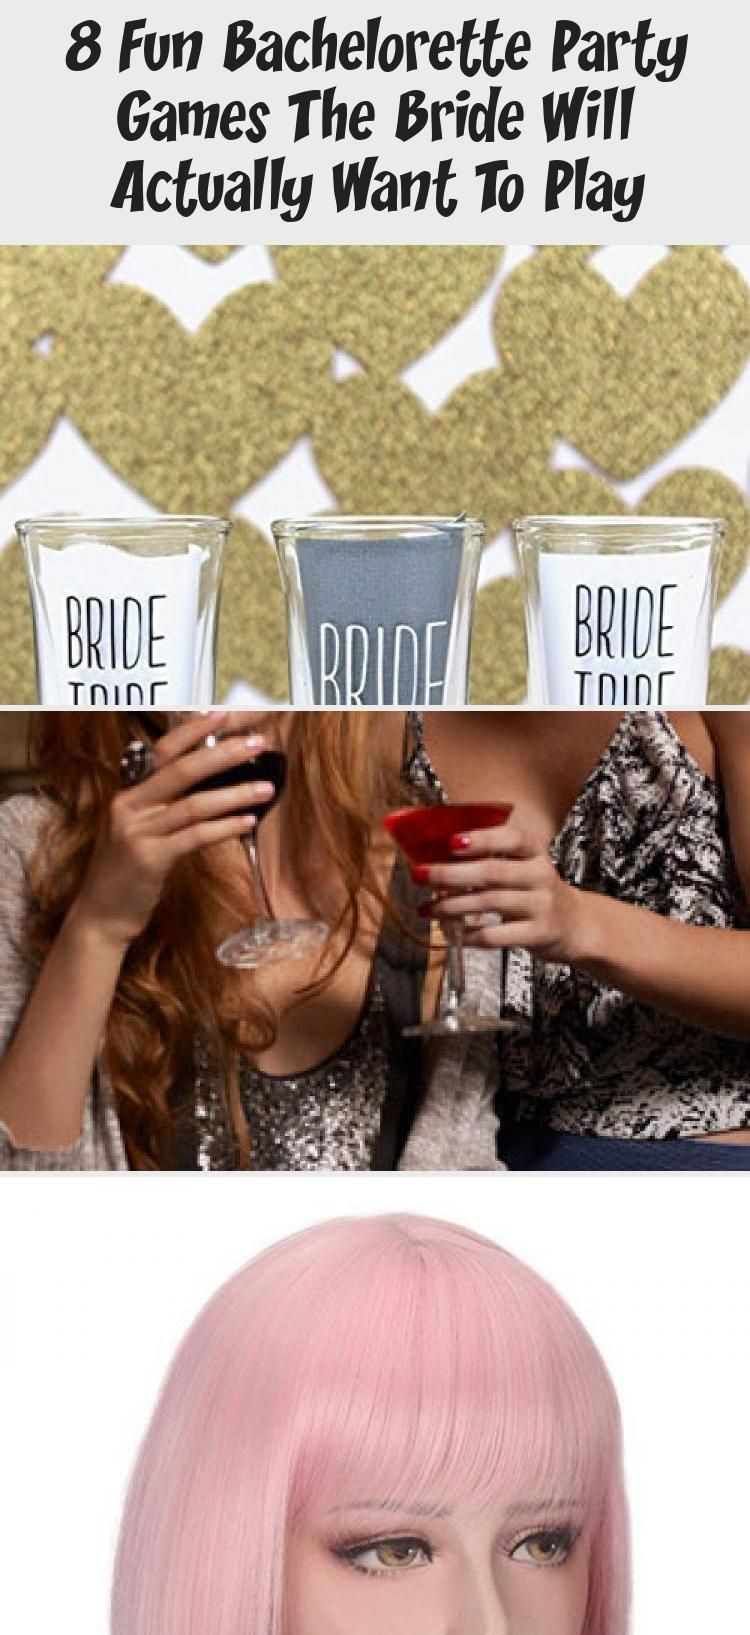 Bachelorette Party Games Ideas
 8 Fun Bachelorette Party Games The Bride Will Actually